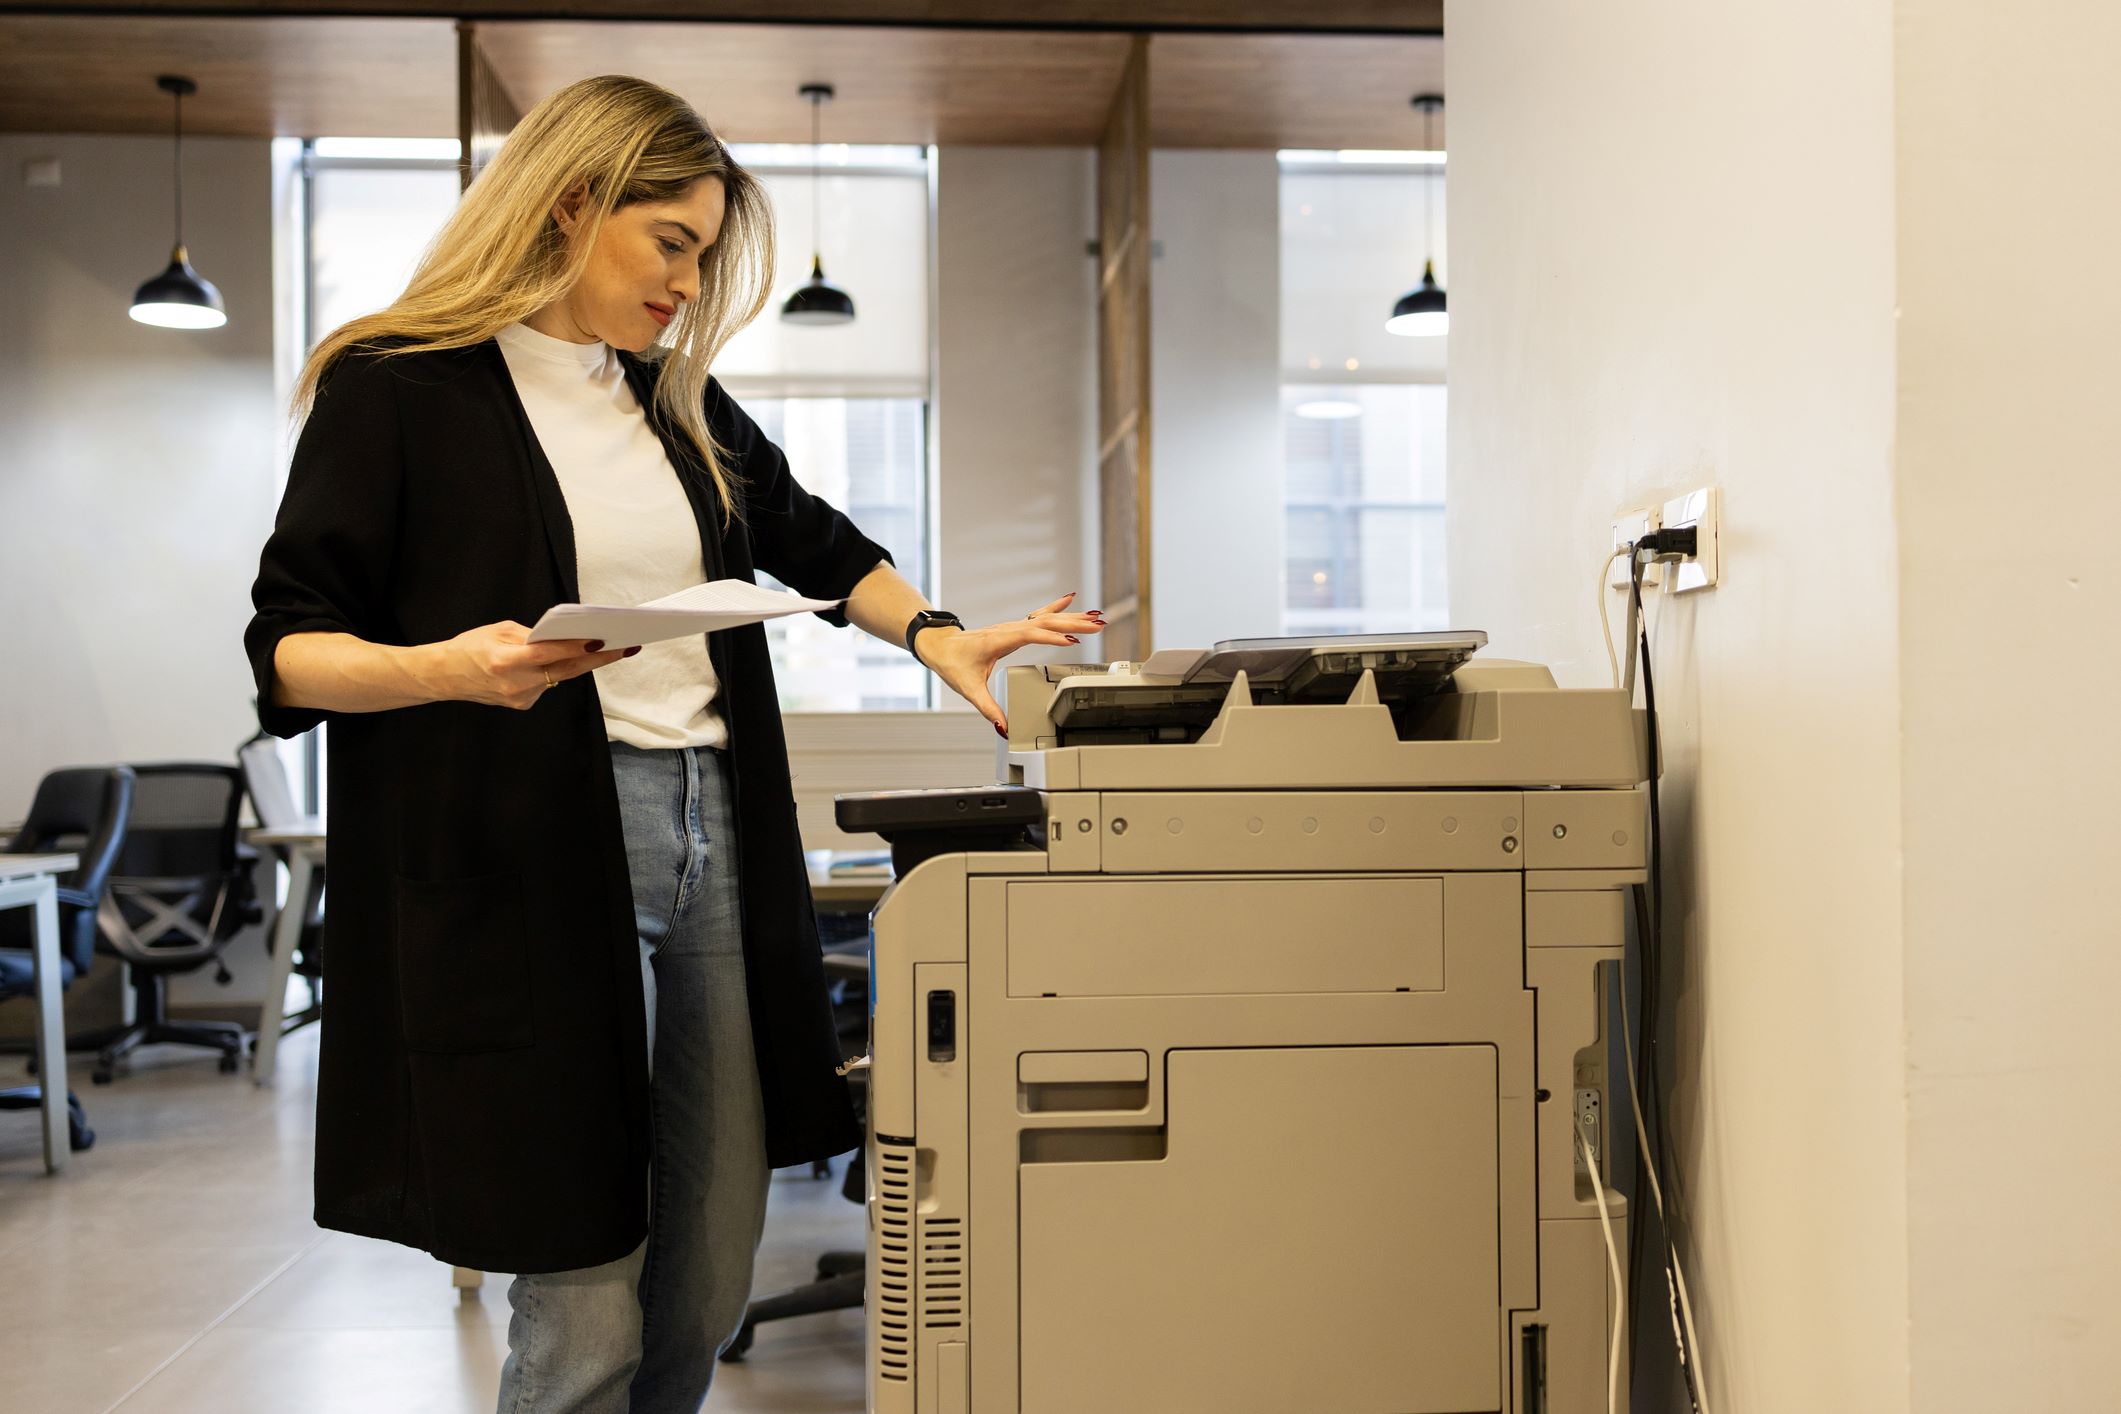 A woman in an office making copies with an office copier, illustrating the device's functionality and importance in everyday office operations.